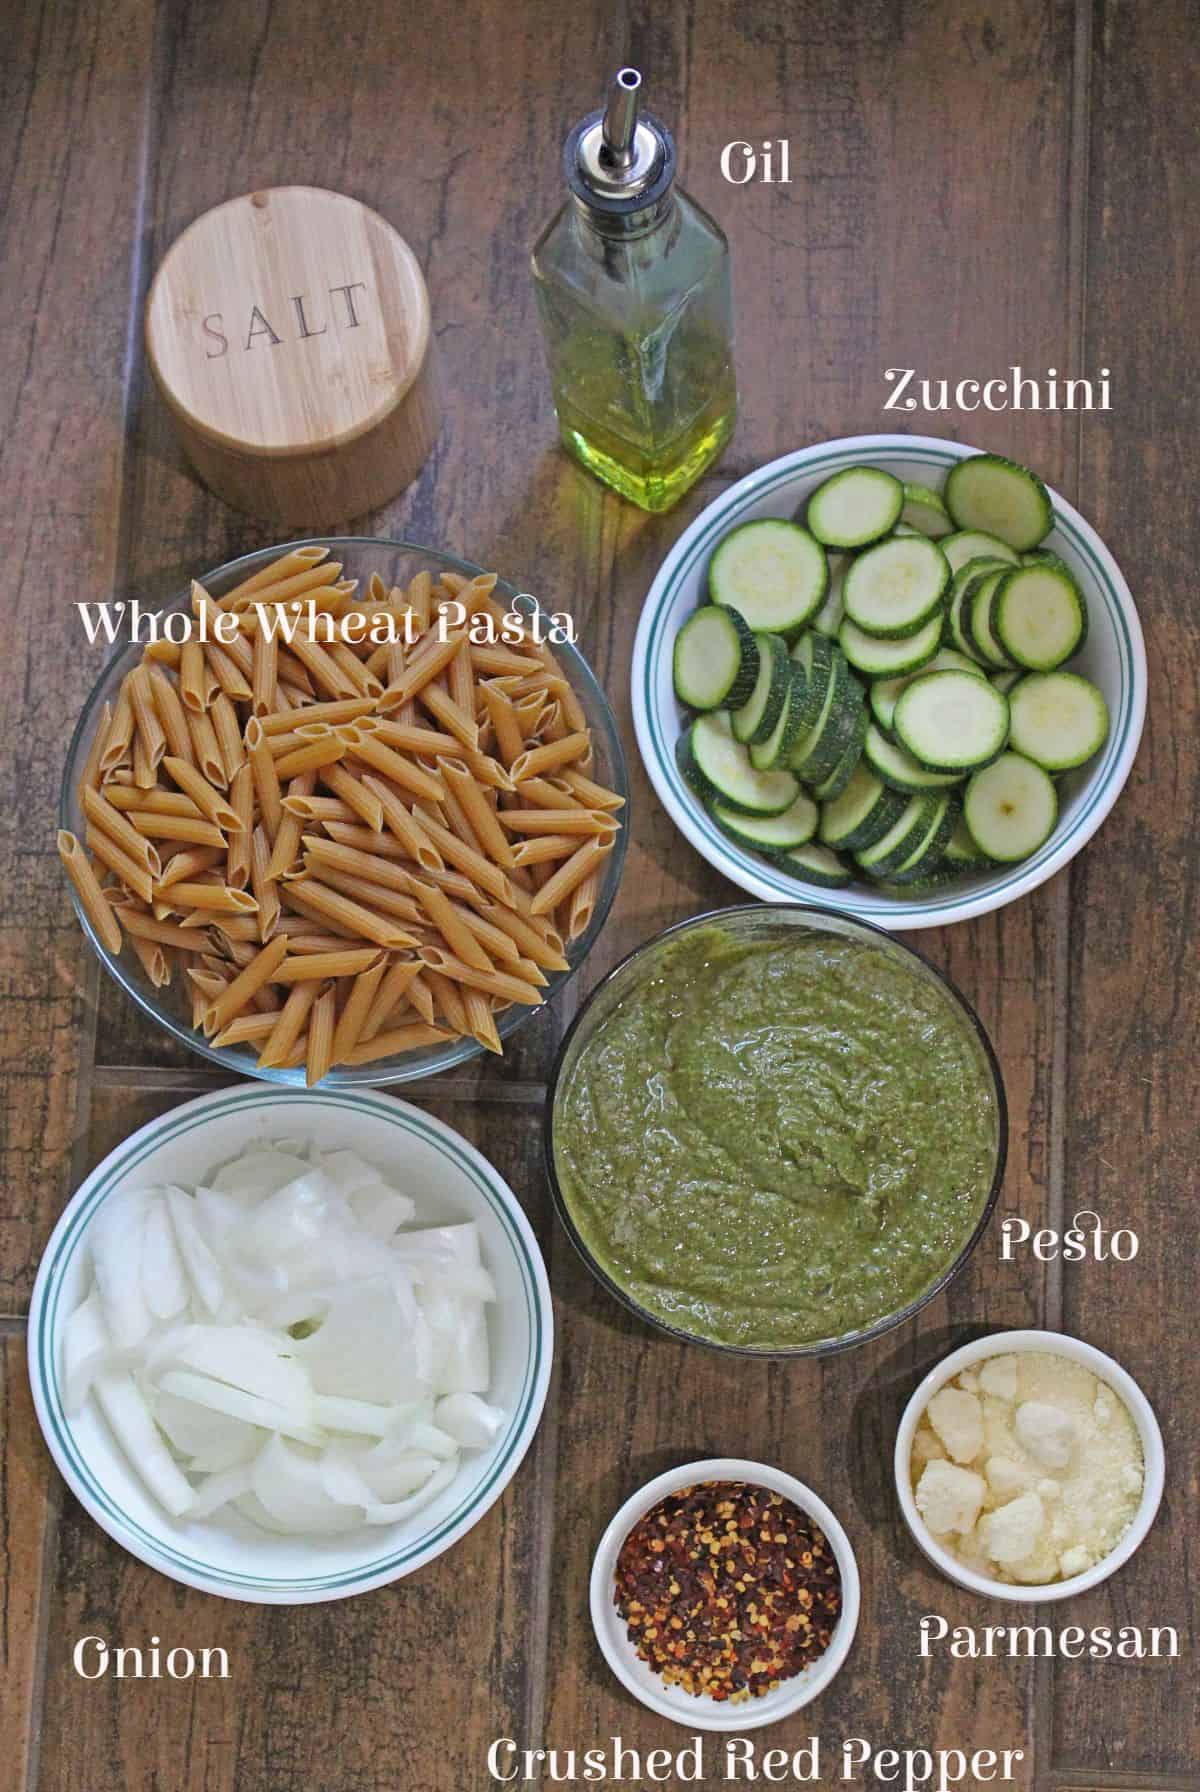 Ingredients laid out and labelled for zucchini pesto pasta